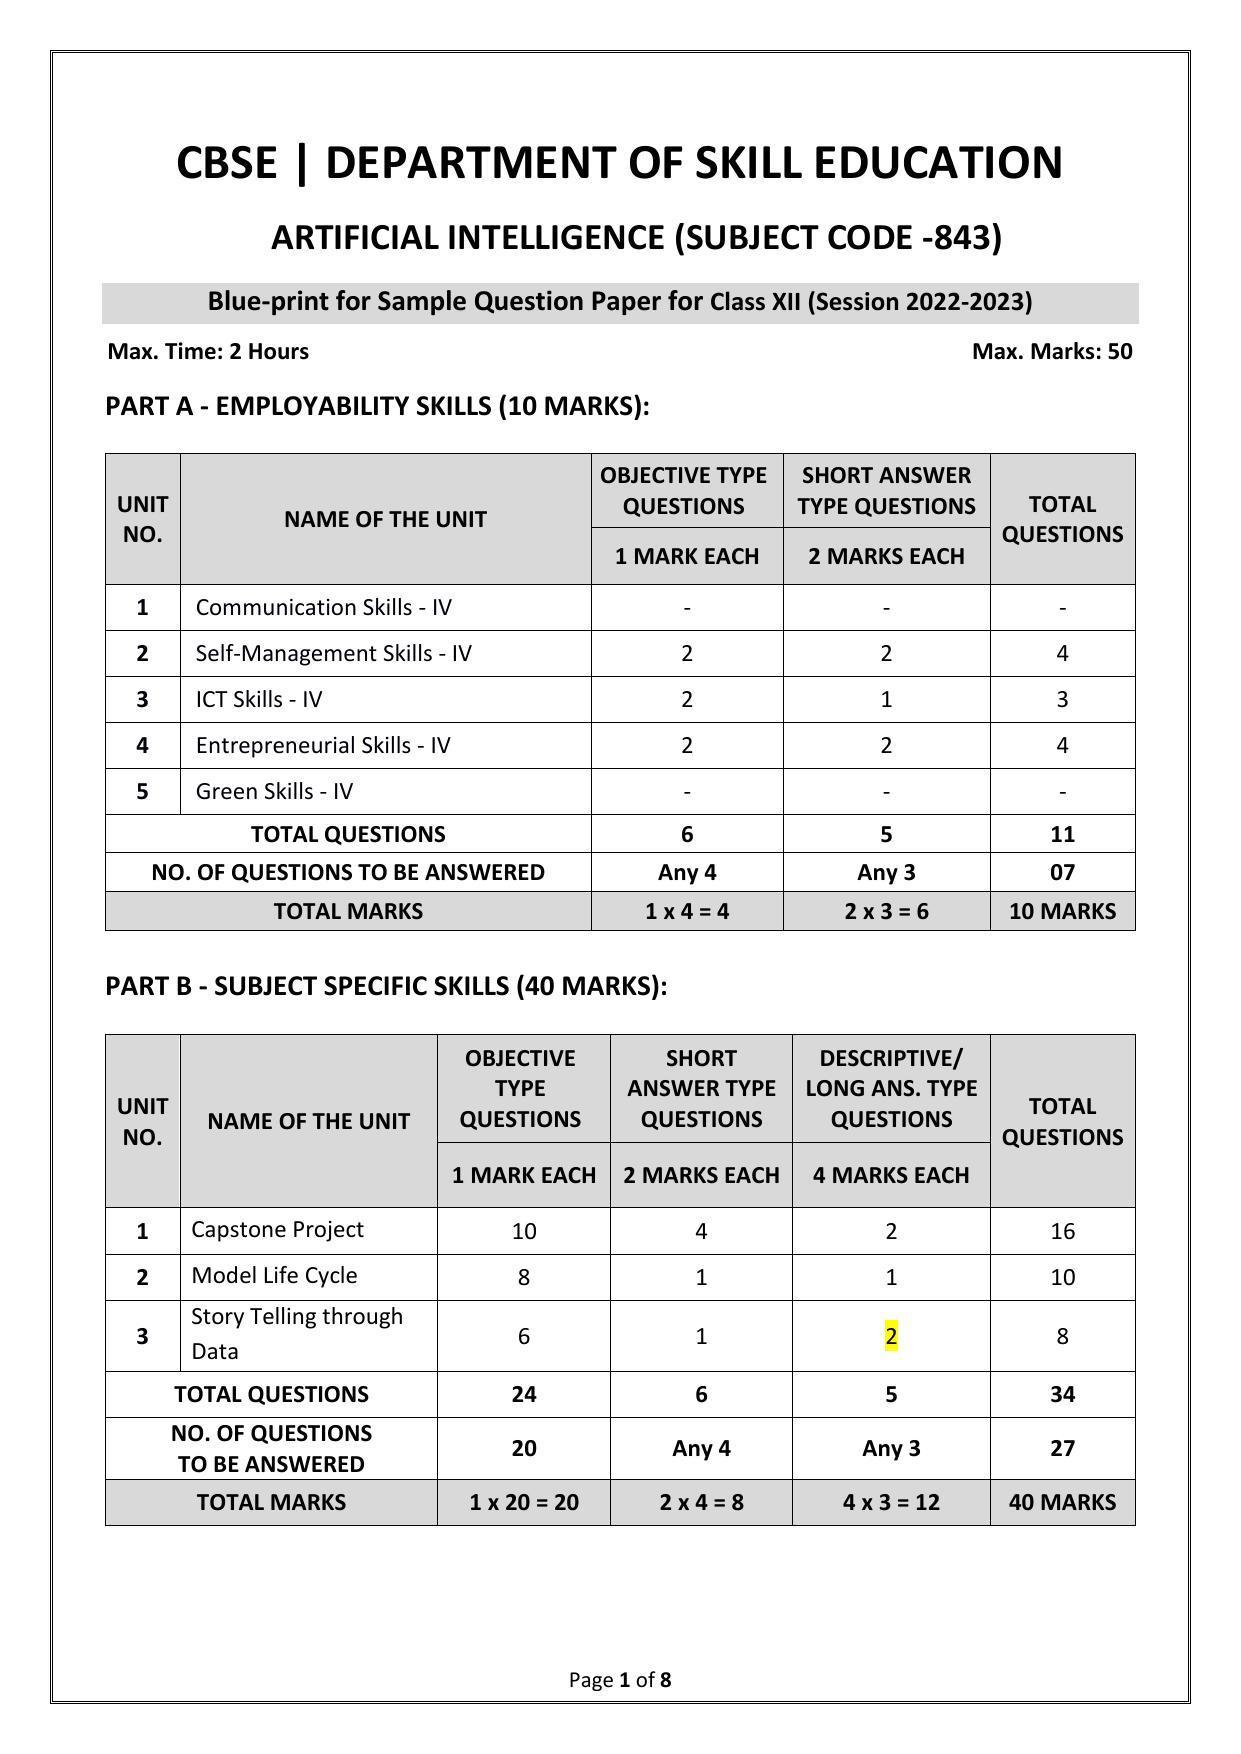 CBSE Class 12 Artificial Intelligence (Skill Education) Sample Papers 2023 - Page 1